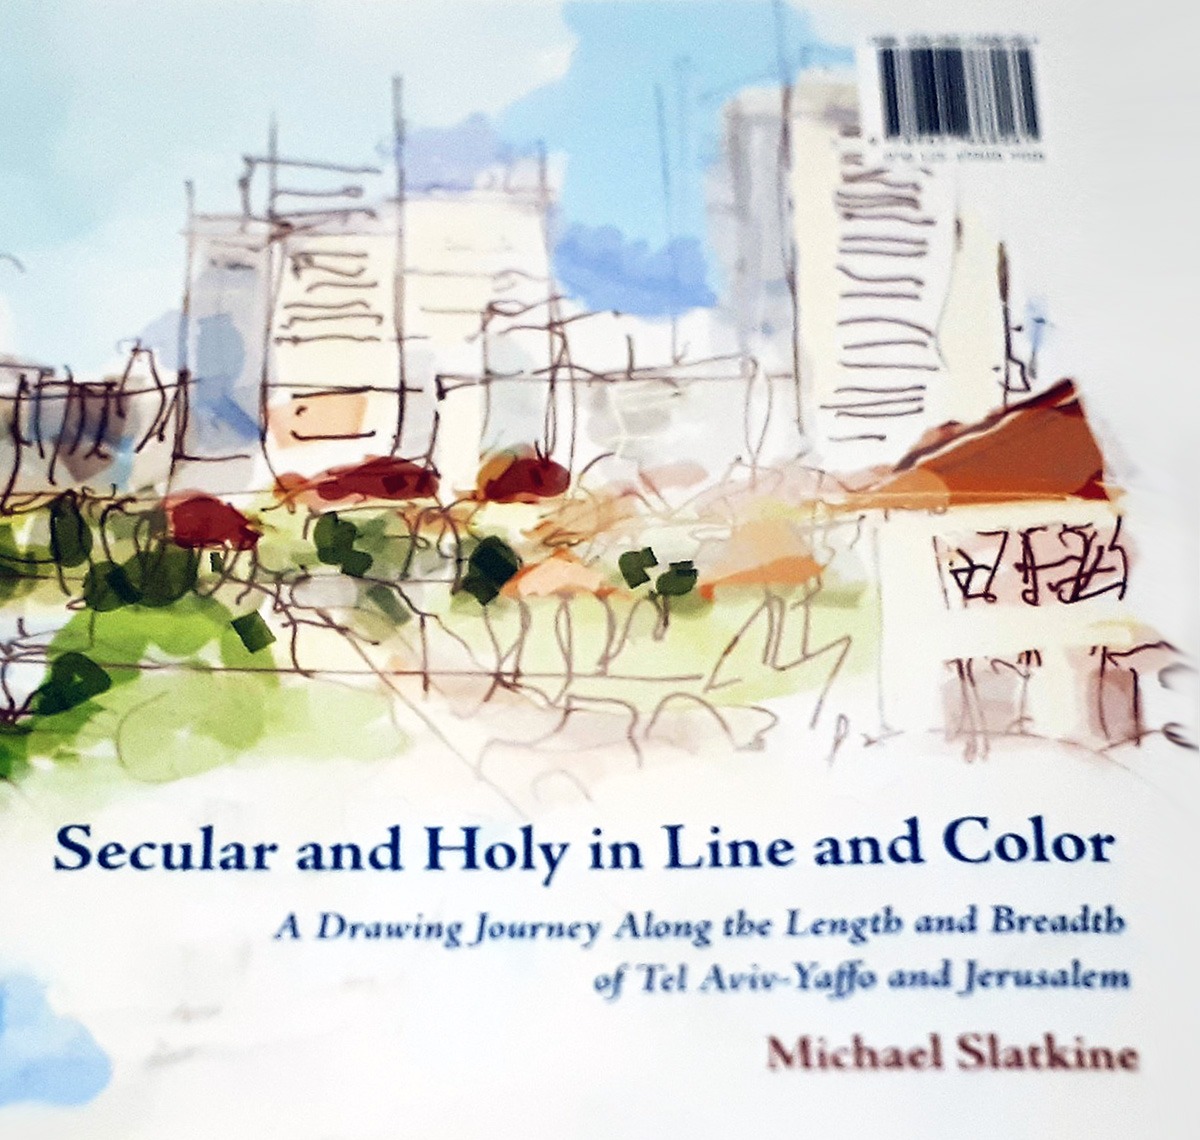 Secular and Holy in Line and Color